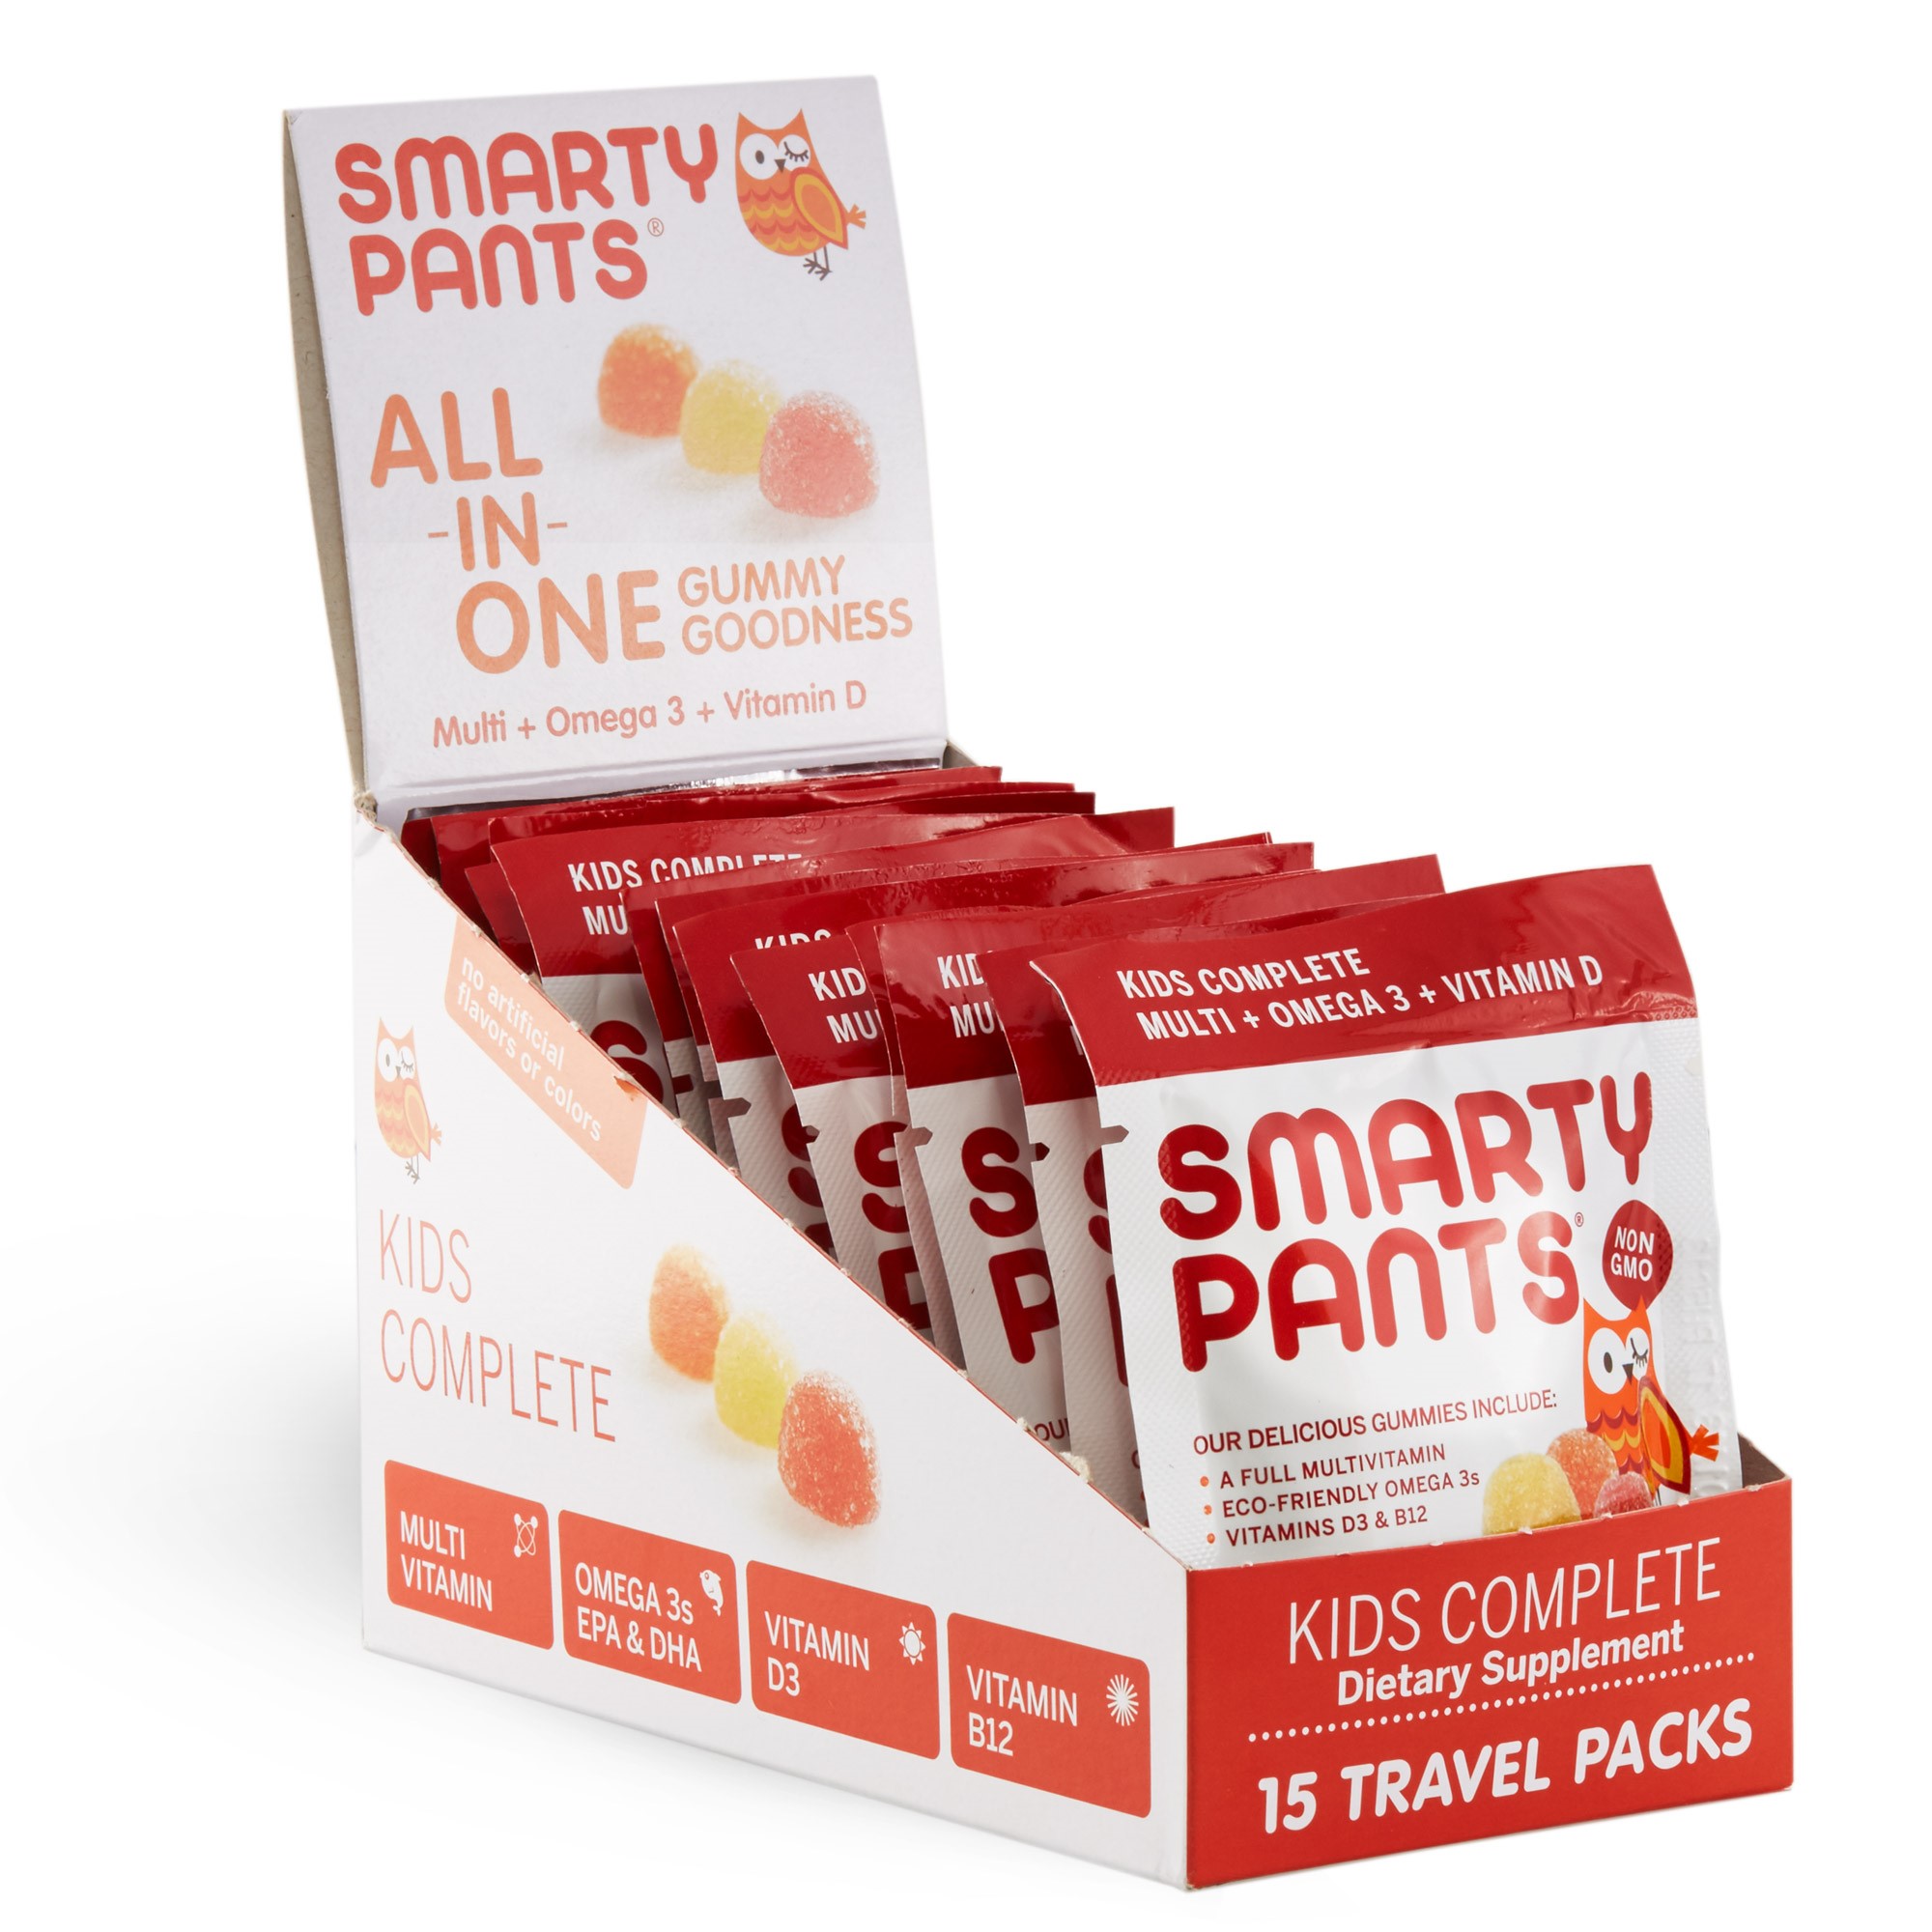 Smartypants gummy vitamins on-the-go! kids complete with multivitamin, omega 3s and vitamin d packets, 15 ct - image 1 of 2